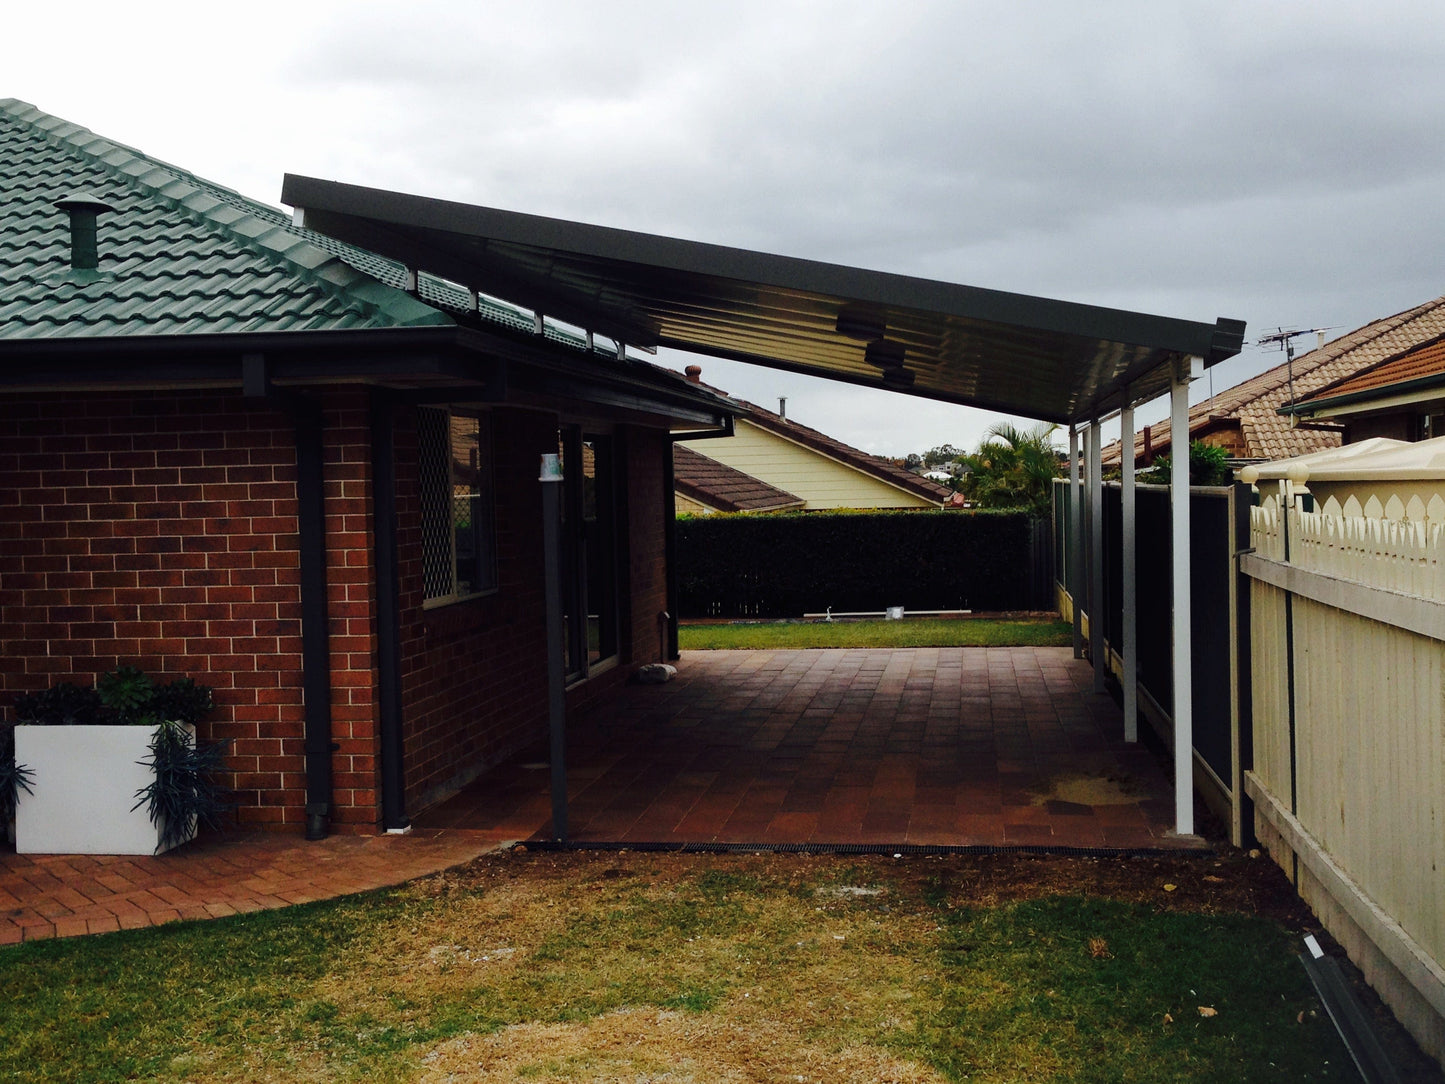 Insulated Flyover Patio Roof- 9m x 3m- Supply & Install QHI National